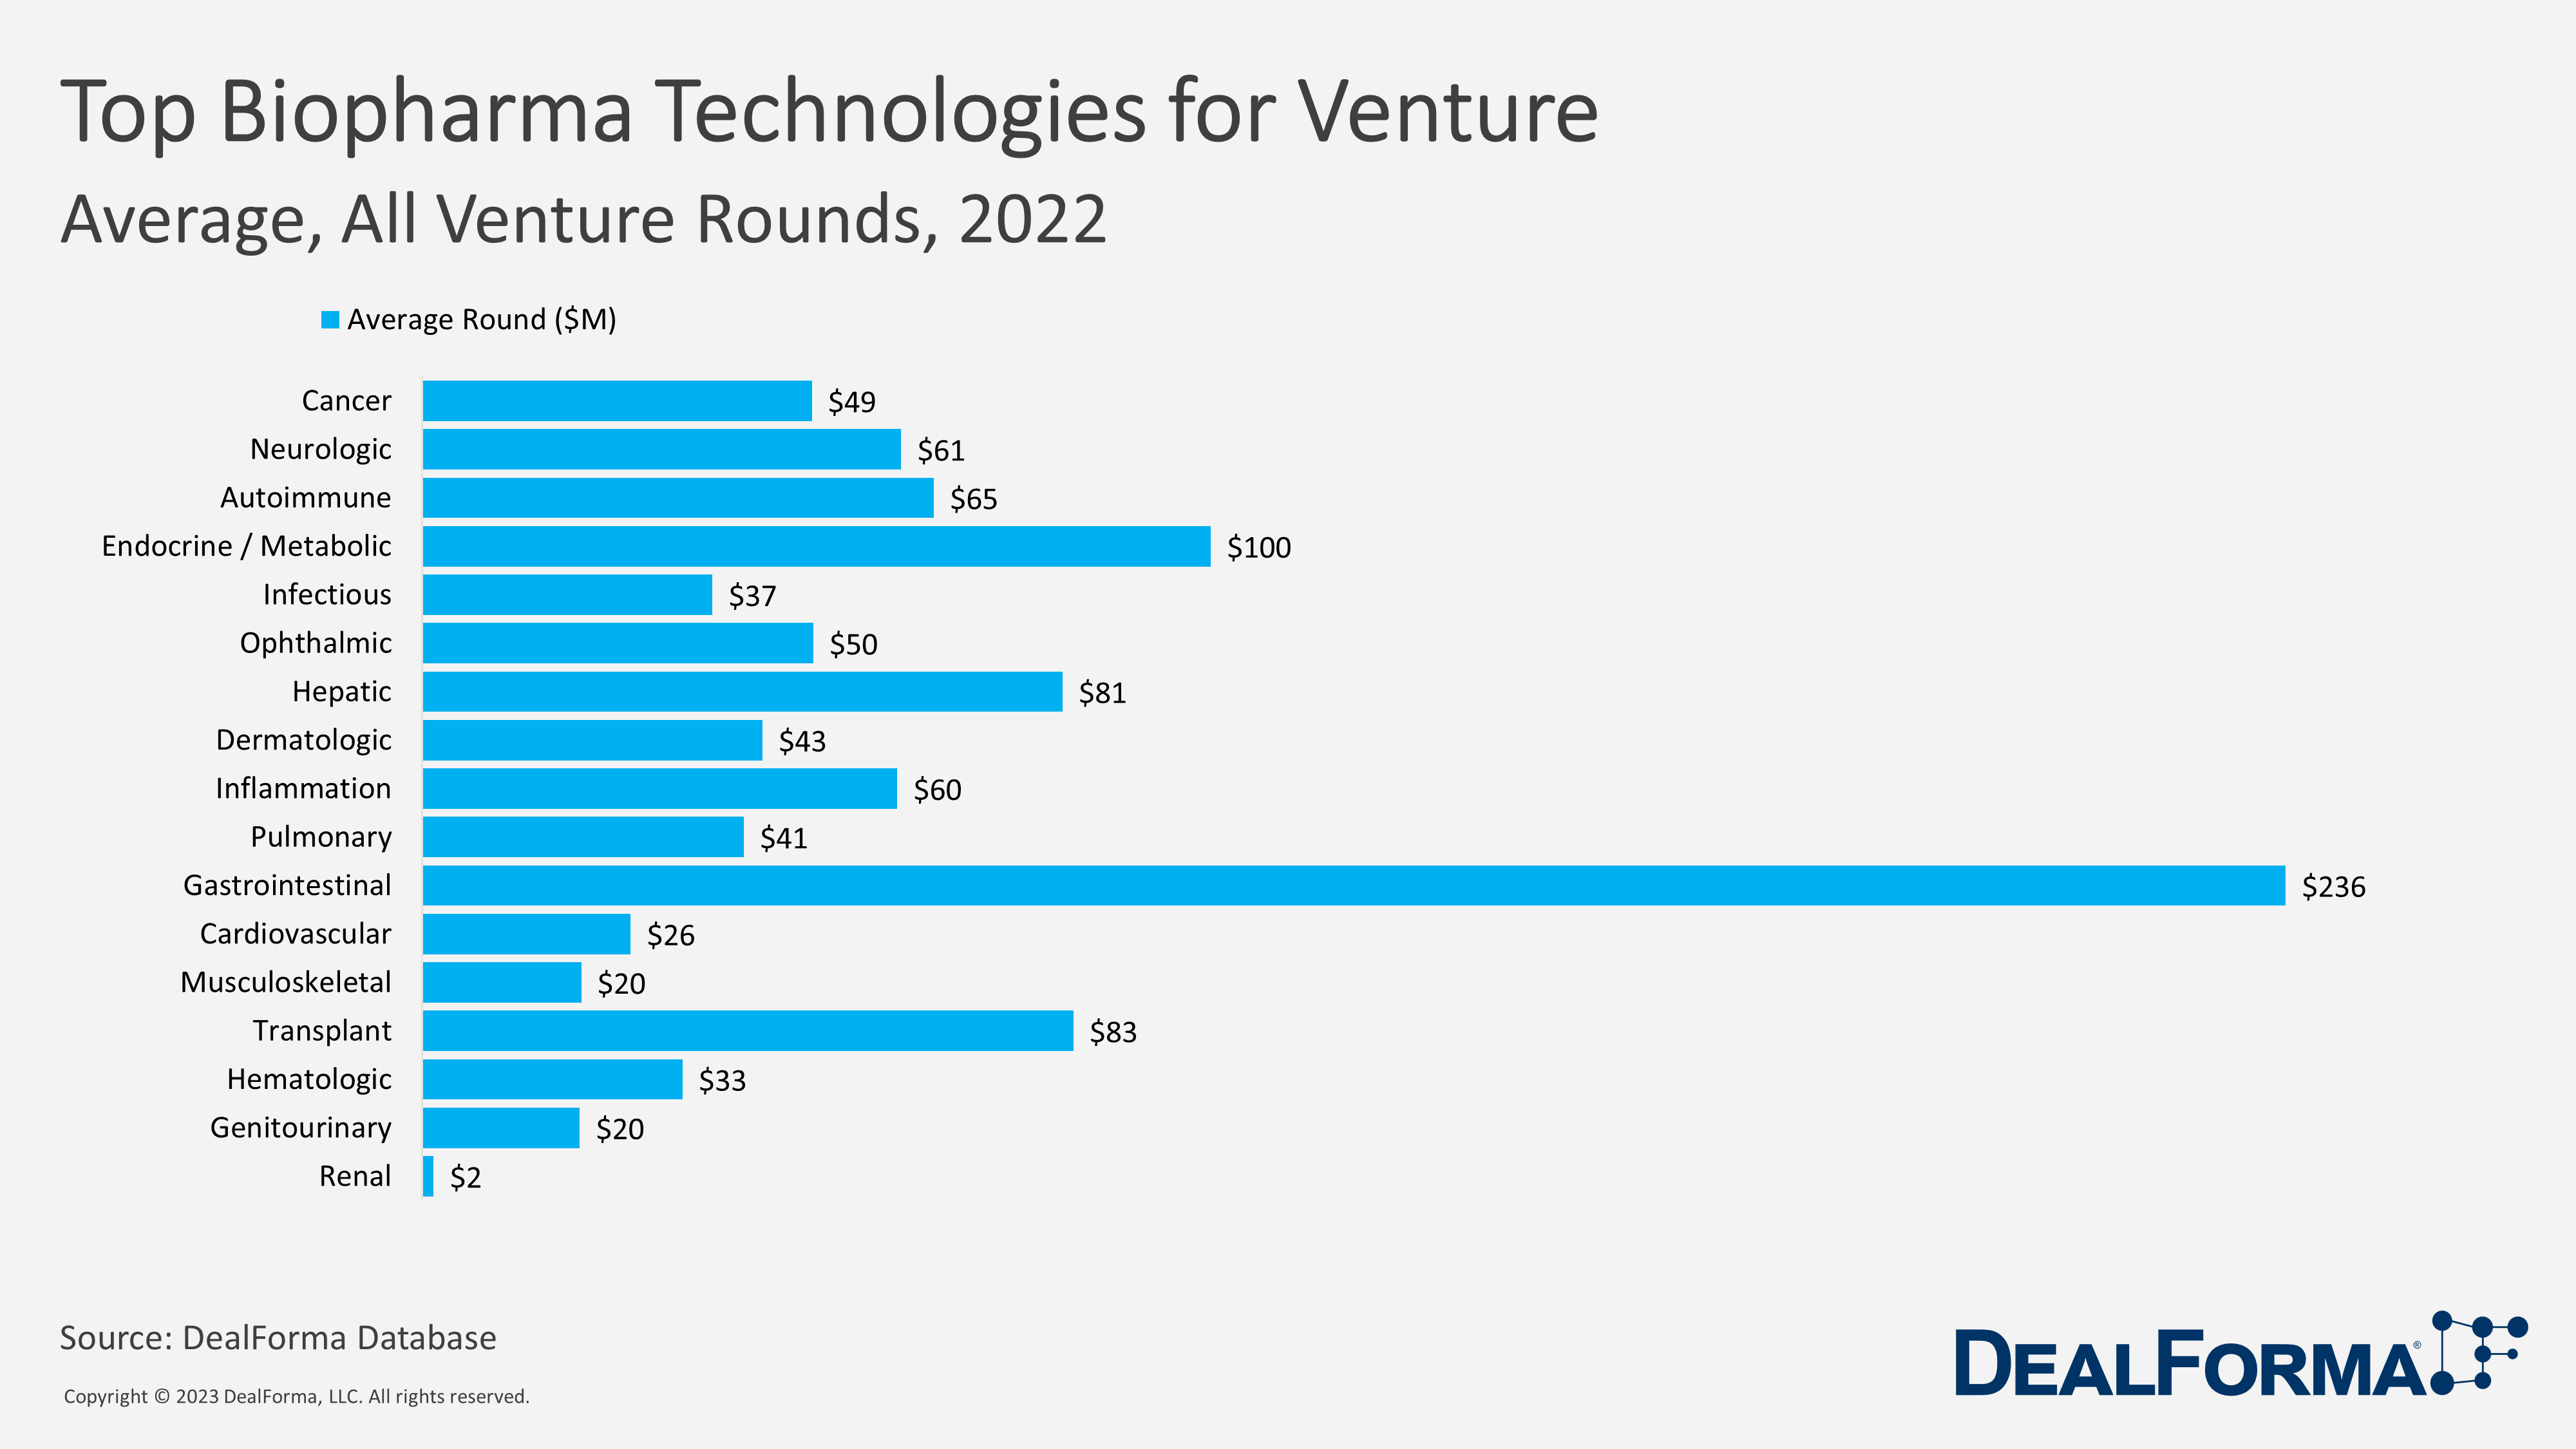 Top Biopharma Technologies for Venture. Average, All Venture Rounds 2022